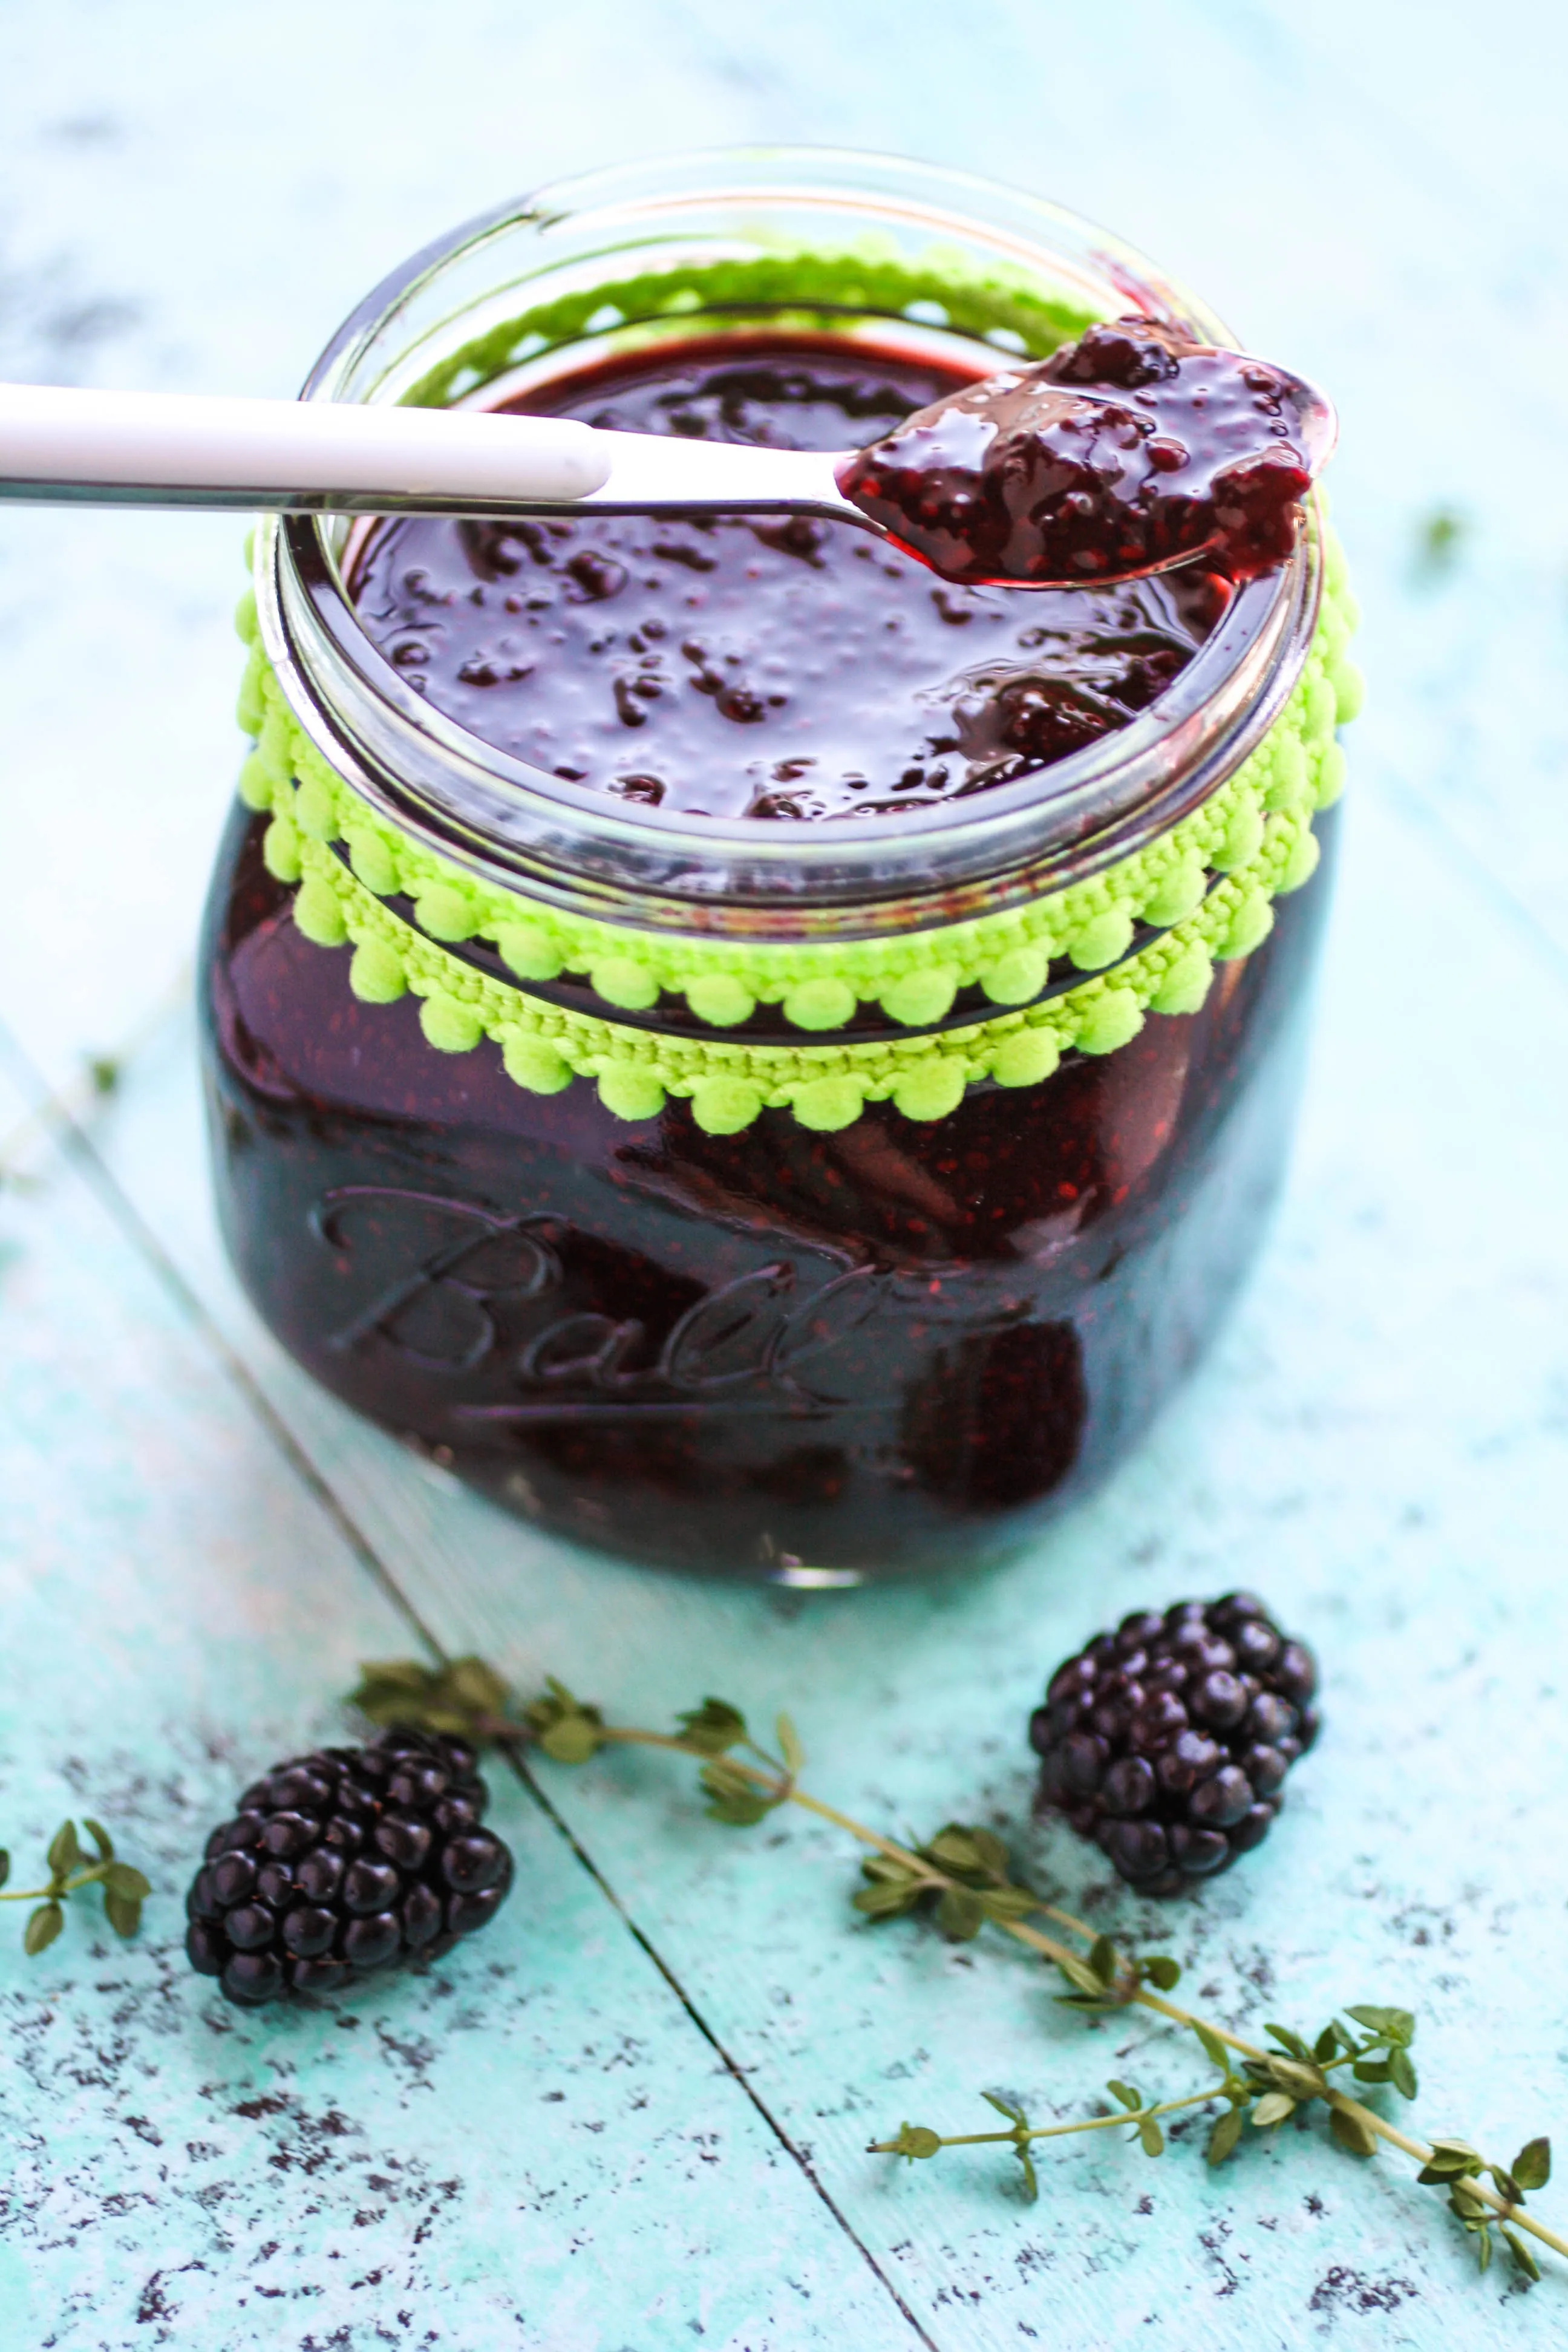 Blackberry-thyme chia seed jam is an easy to make treat. Blackberry-thyme chia seed jam is fruity and delicious.